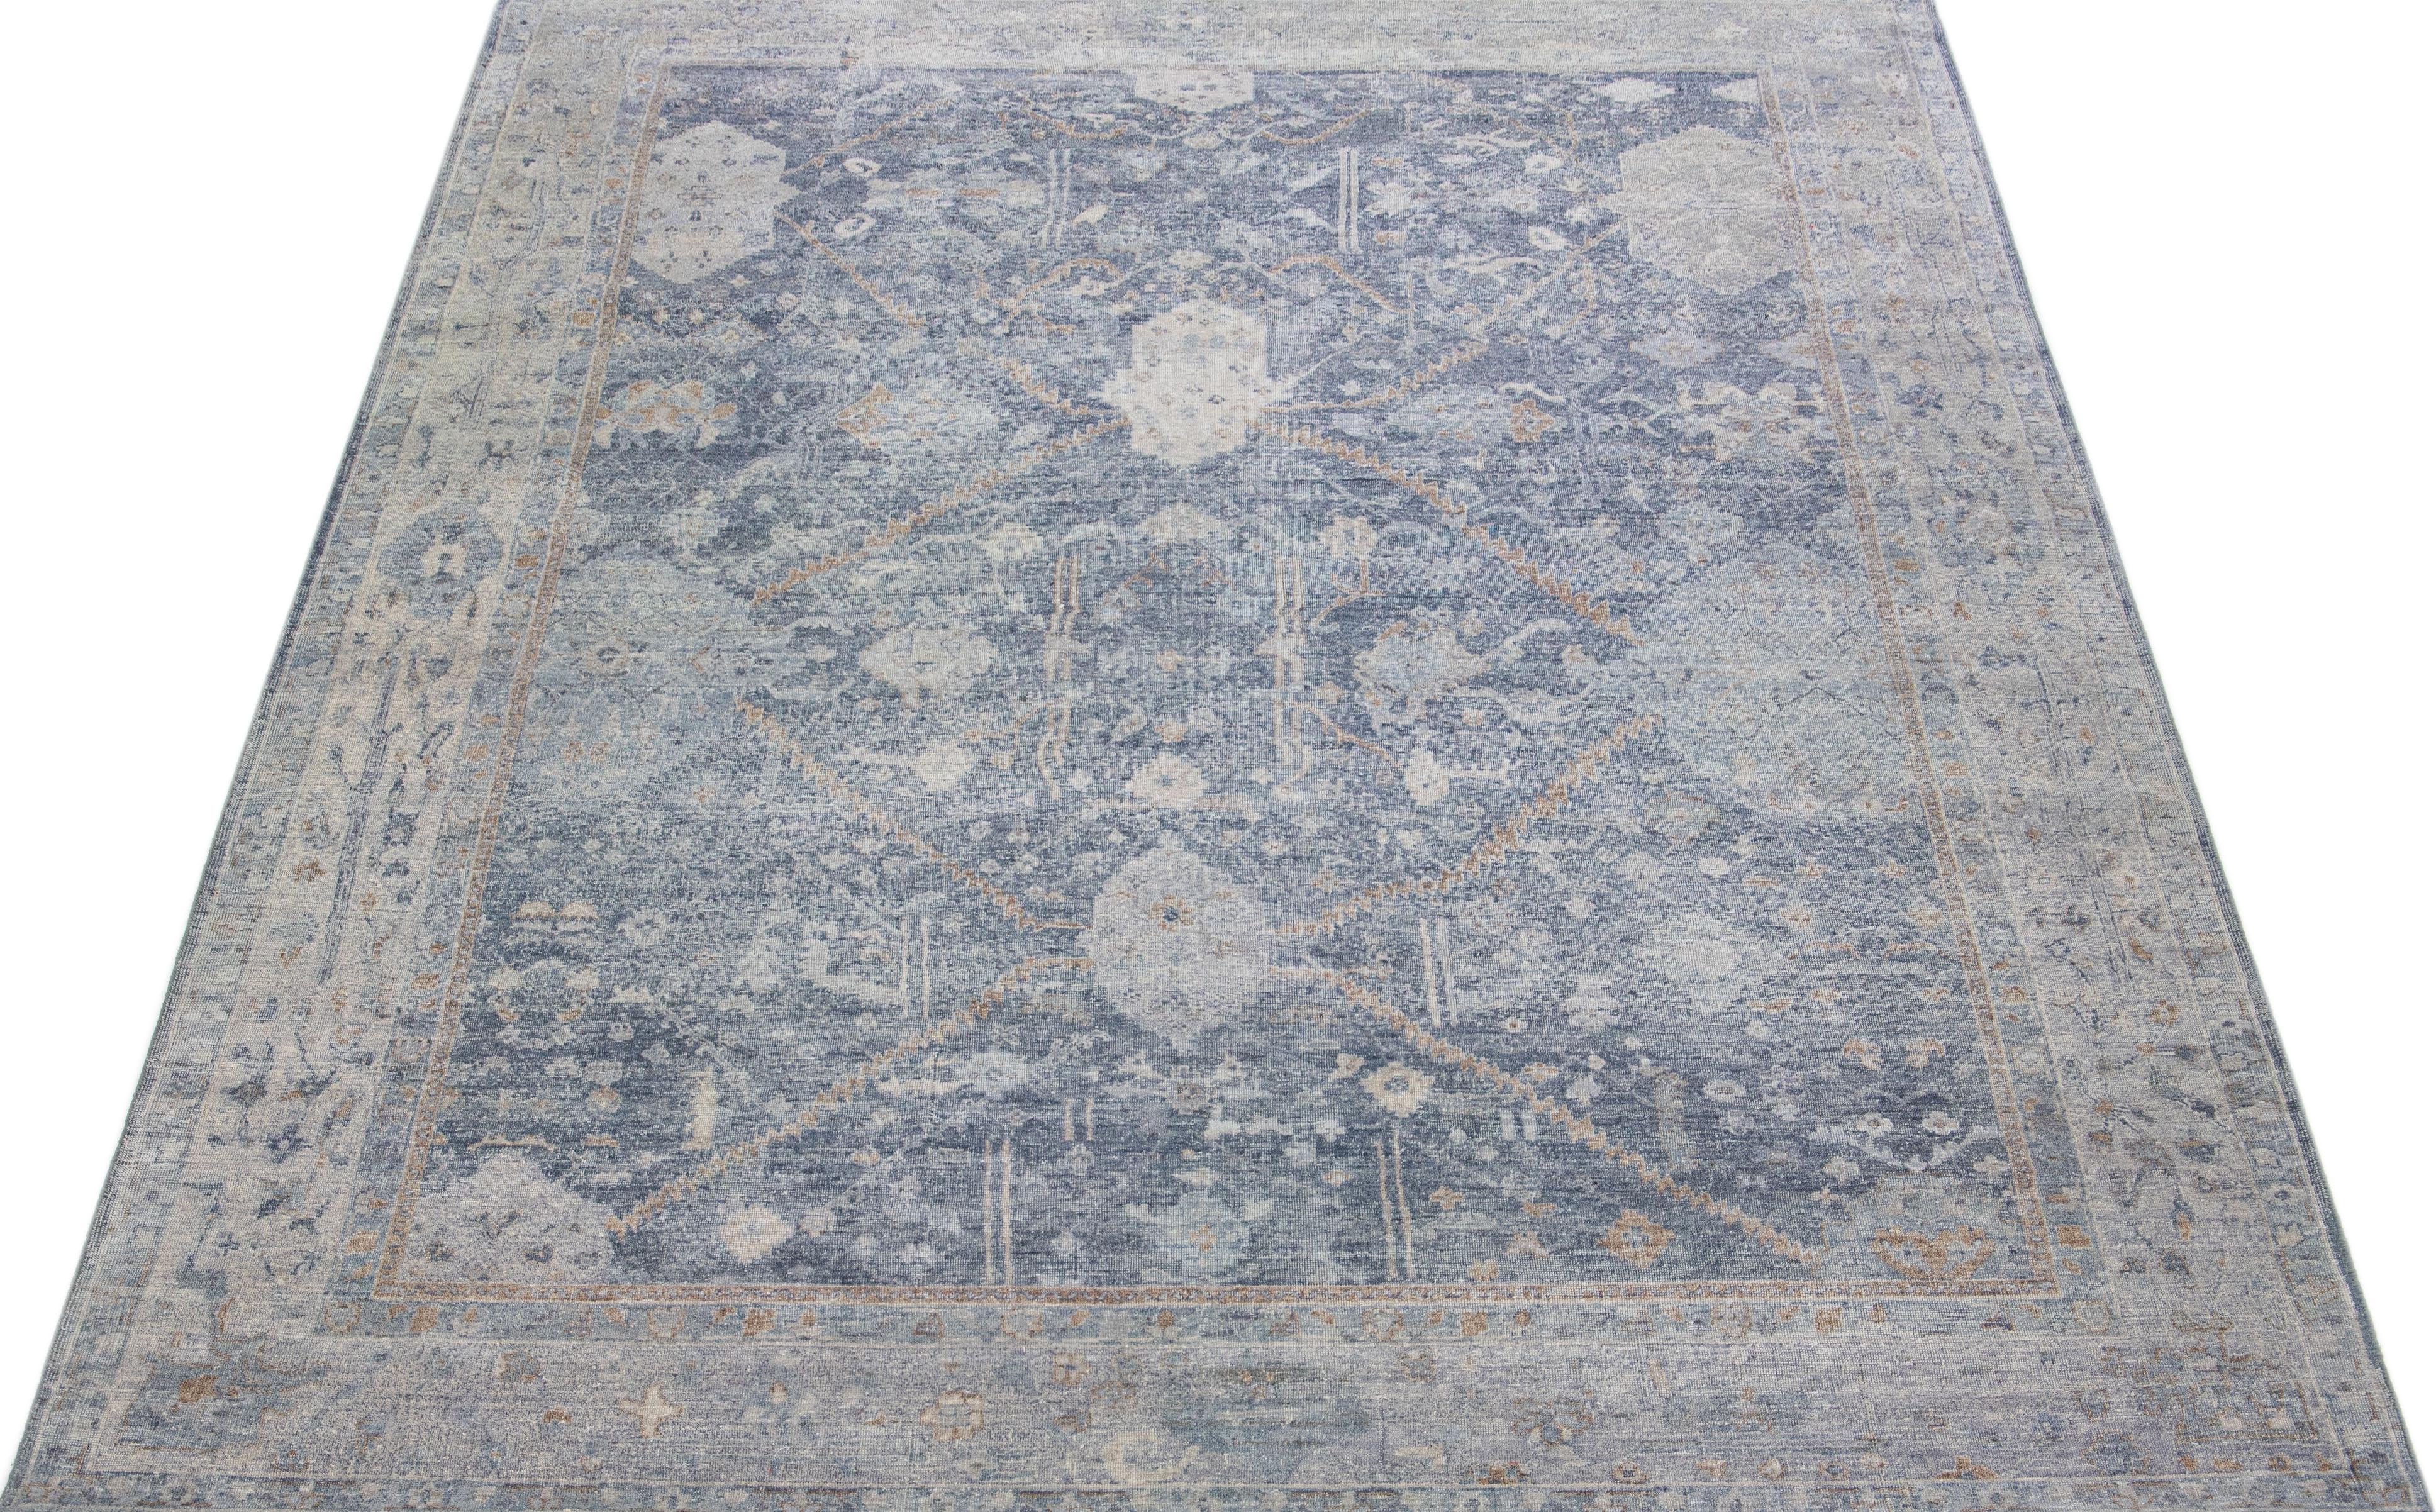 Apadana's artisan line is an antique rug reimaging with an elegant way to inject a striking antique aesthetic into a space. This line of rugs is decidedly unique and reimagines what an antique rug look can be. Every single piece from our Artisan